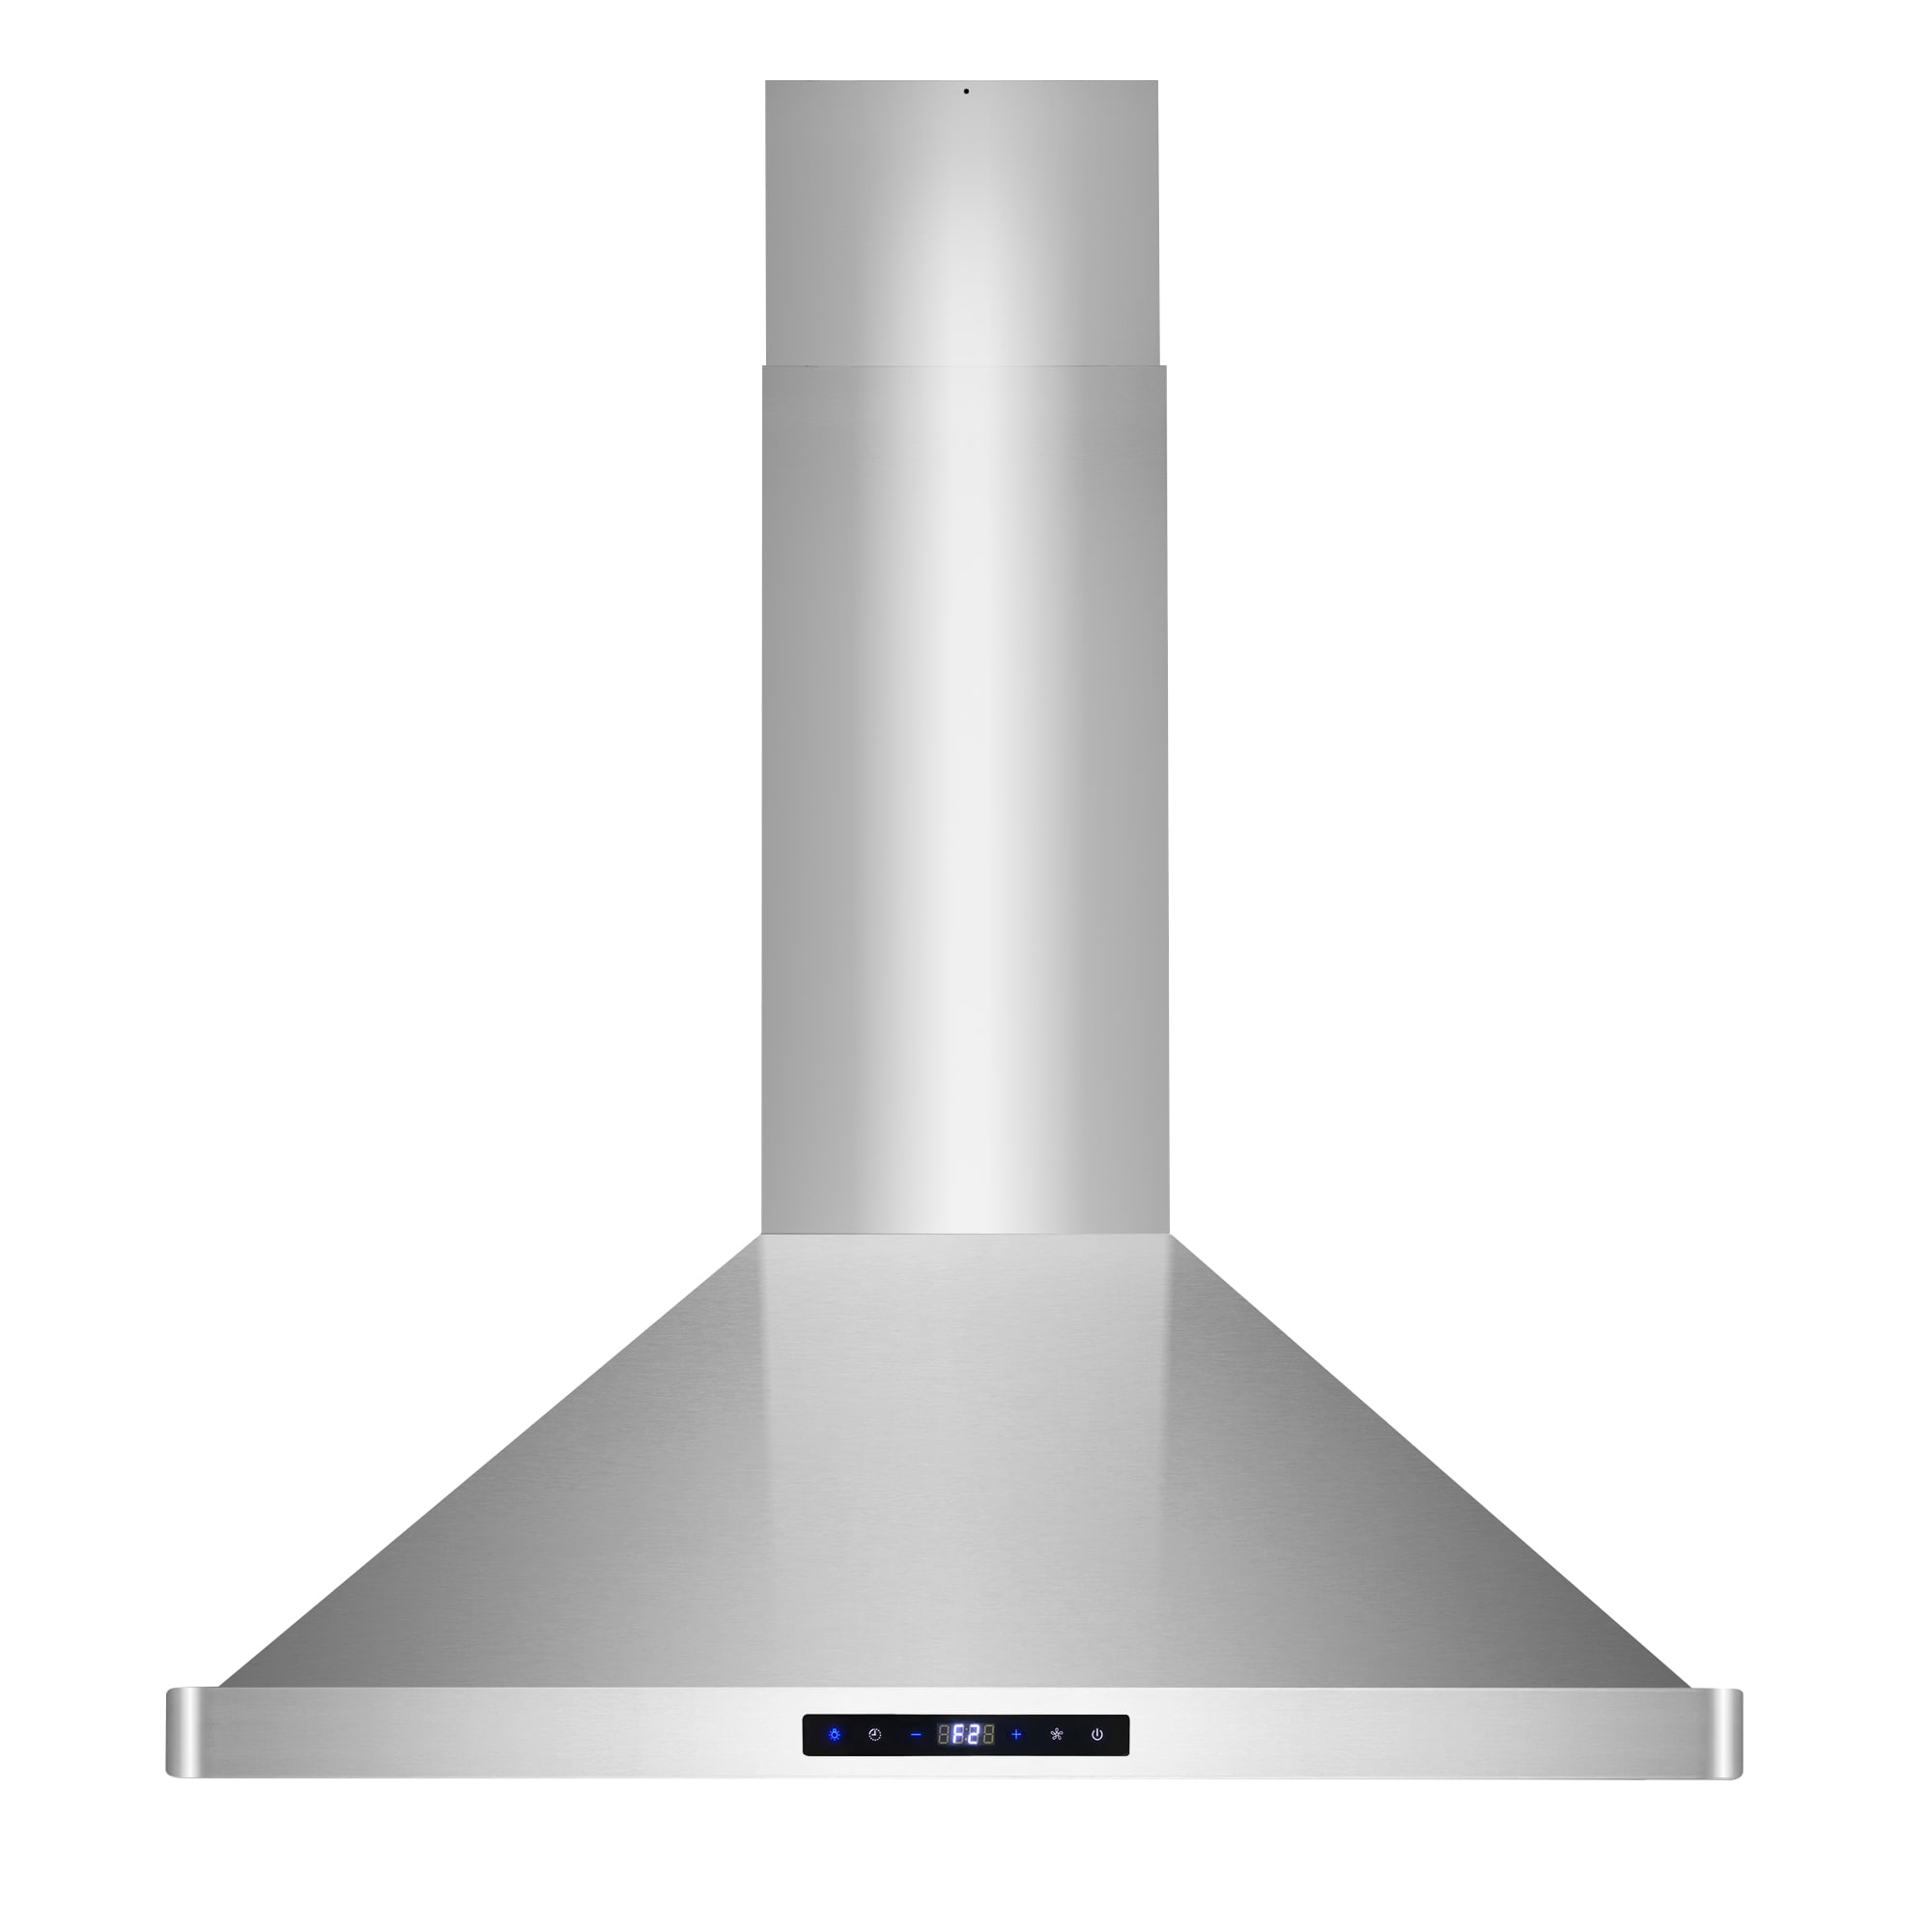 Cosmo 30-in Ductless Stainless Steel Island Range Hood with Charcoal Filter  in the Island Range Hoods department at